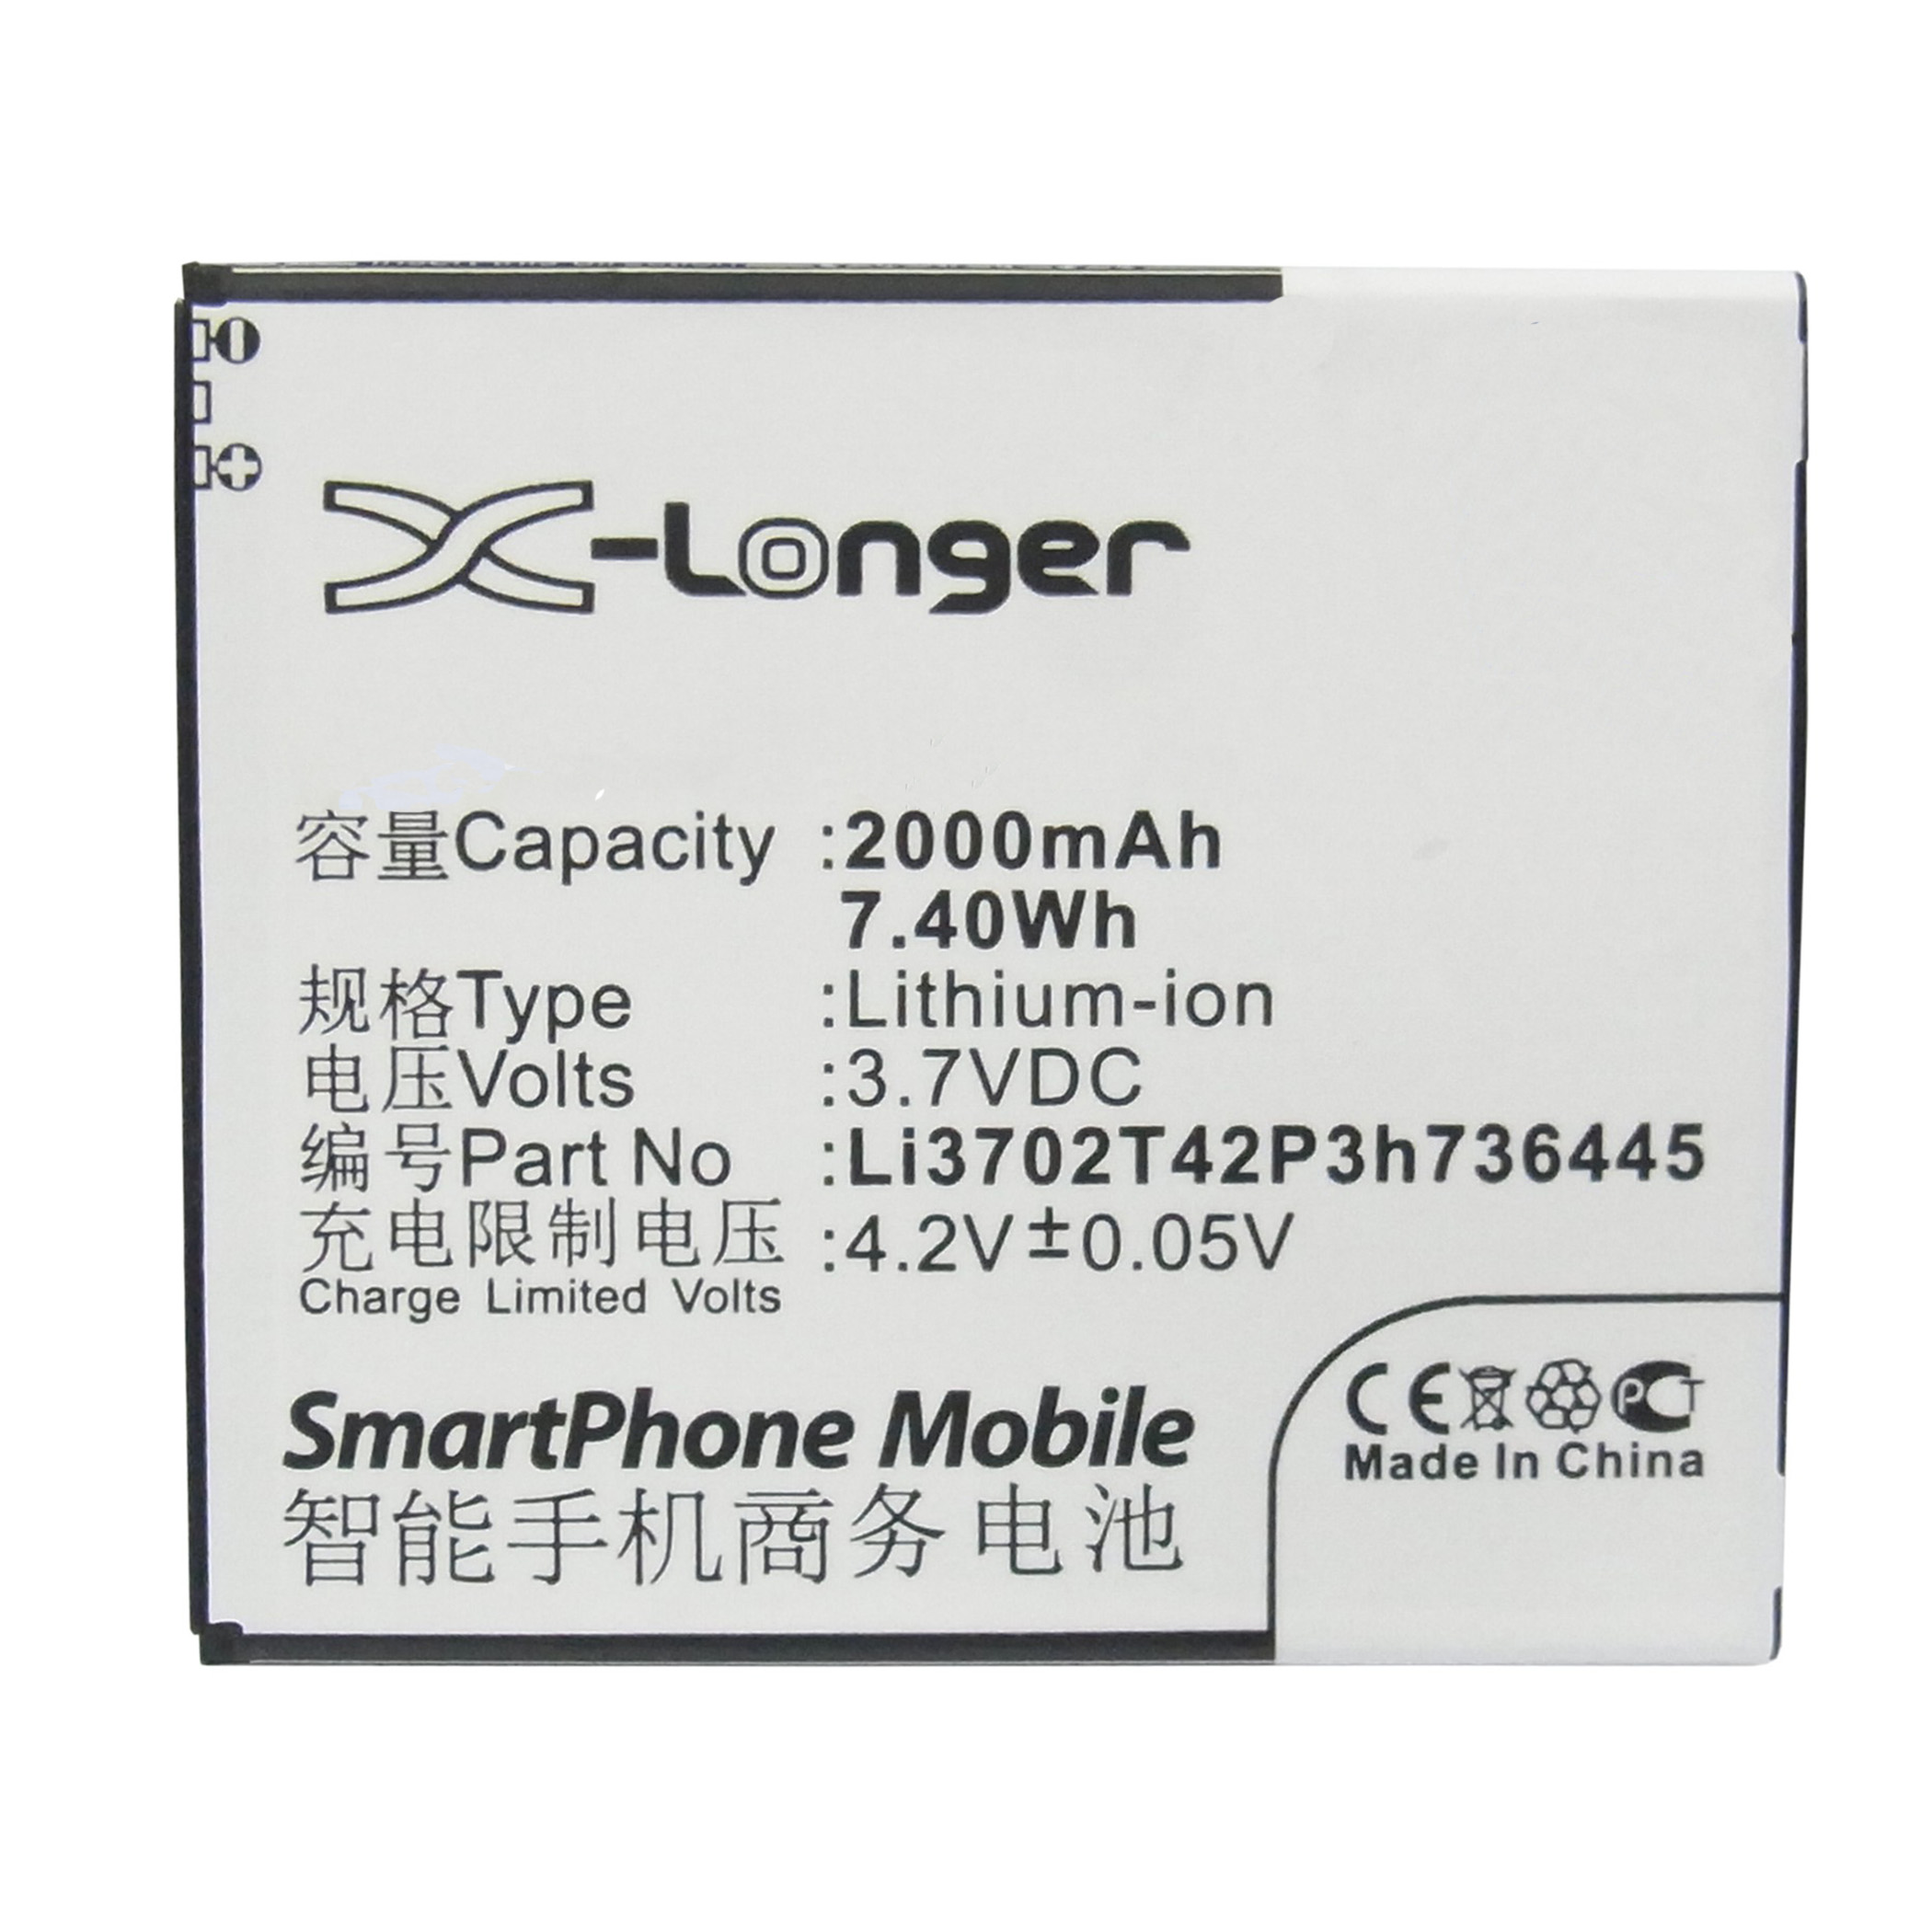 Synergy Digital Battery Compatible With ZTE Li3702T42P3h736445 Cellphone Battery - (Li-Ion, 3.7V, 2000 mAh / 7.40Wh)